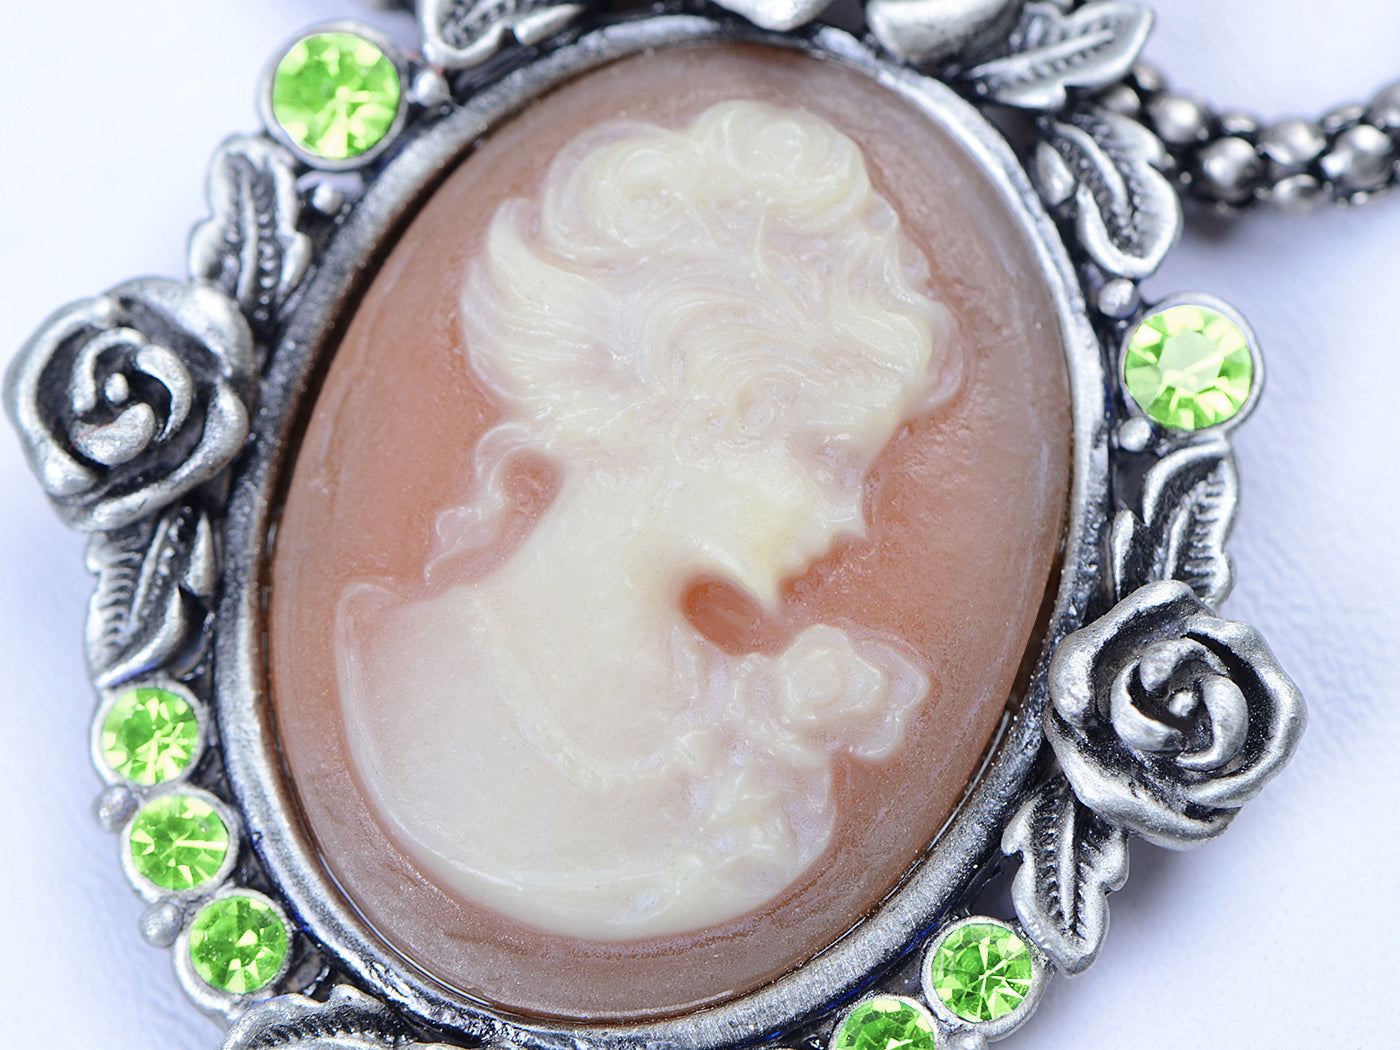 Vintage Lady Cameo Maiden Flower Floral Green Pendant Necklace